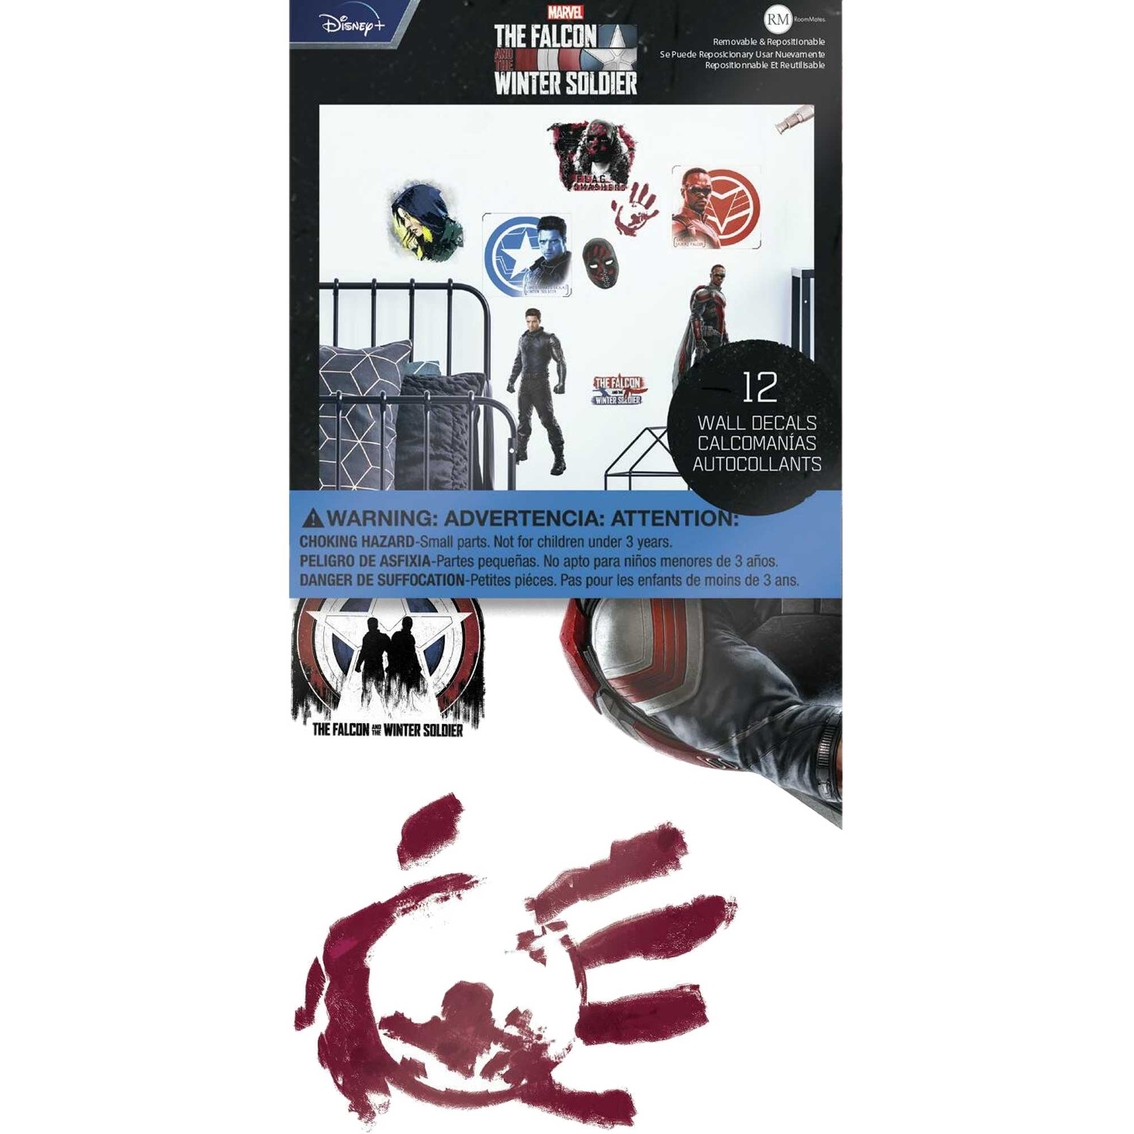 RoomMates Falcon and the Winter Soldier Peel & Stick Wall Decals - Image 6 of 6